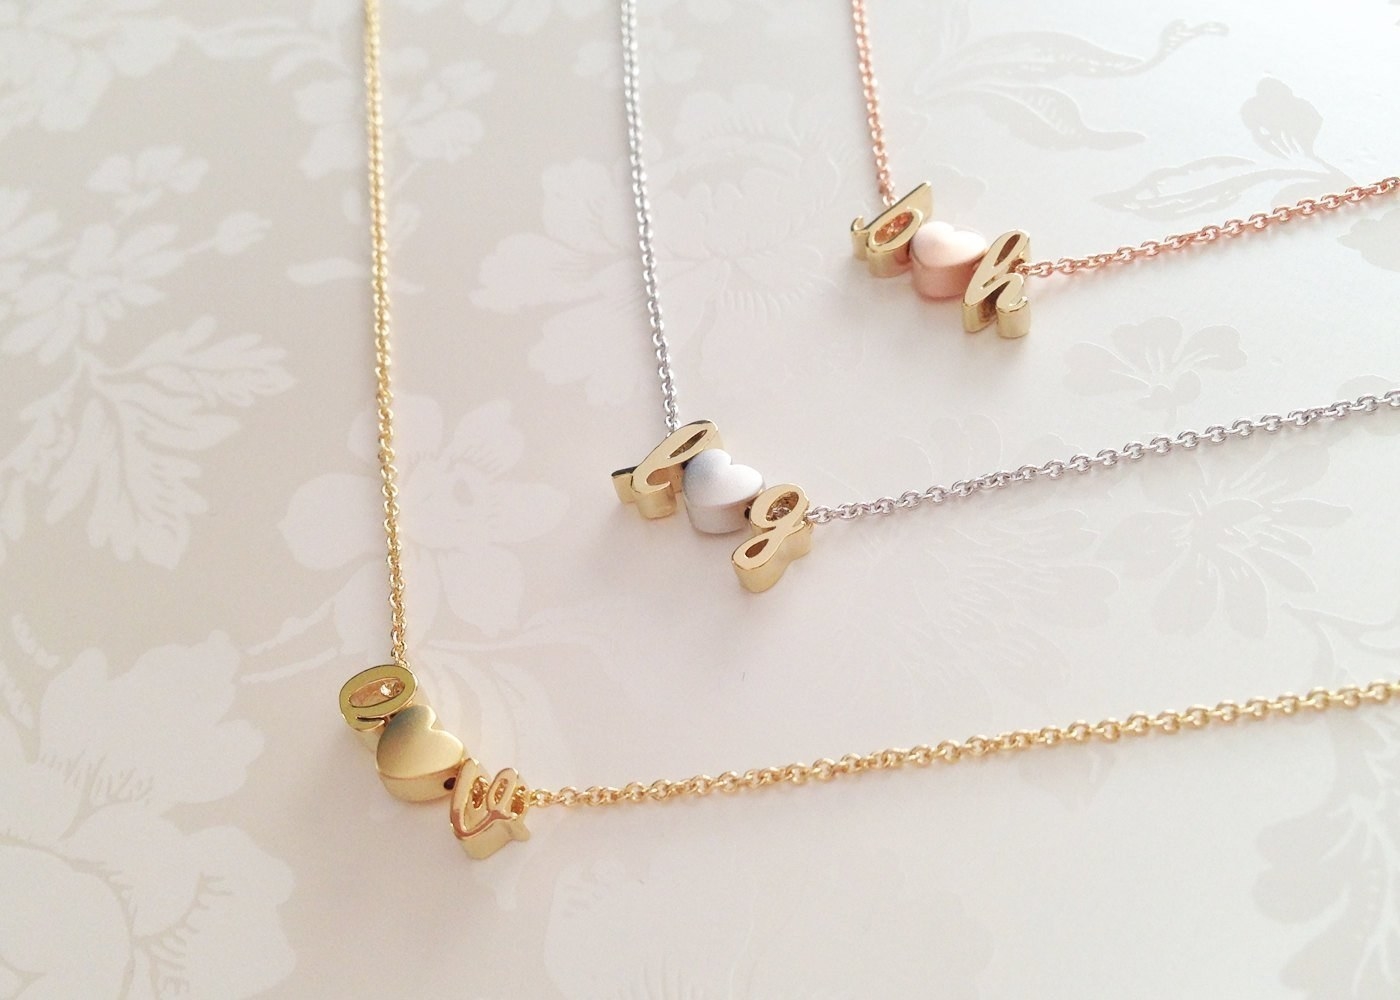 30 Simple Yet Chic Necklaces You Should Have - Fancy Ideas about